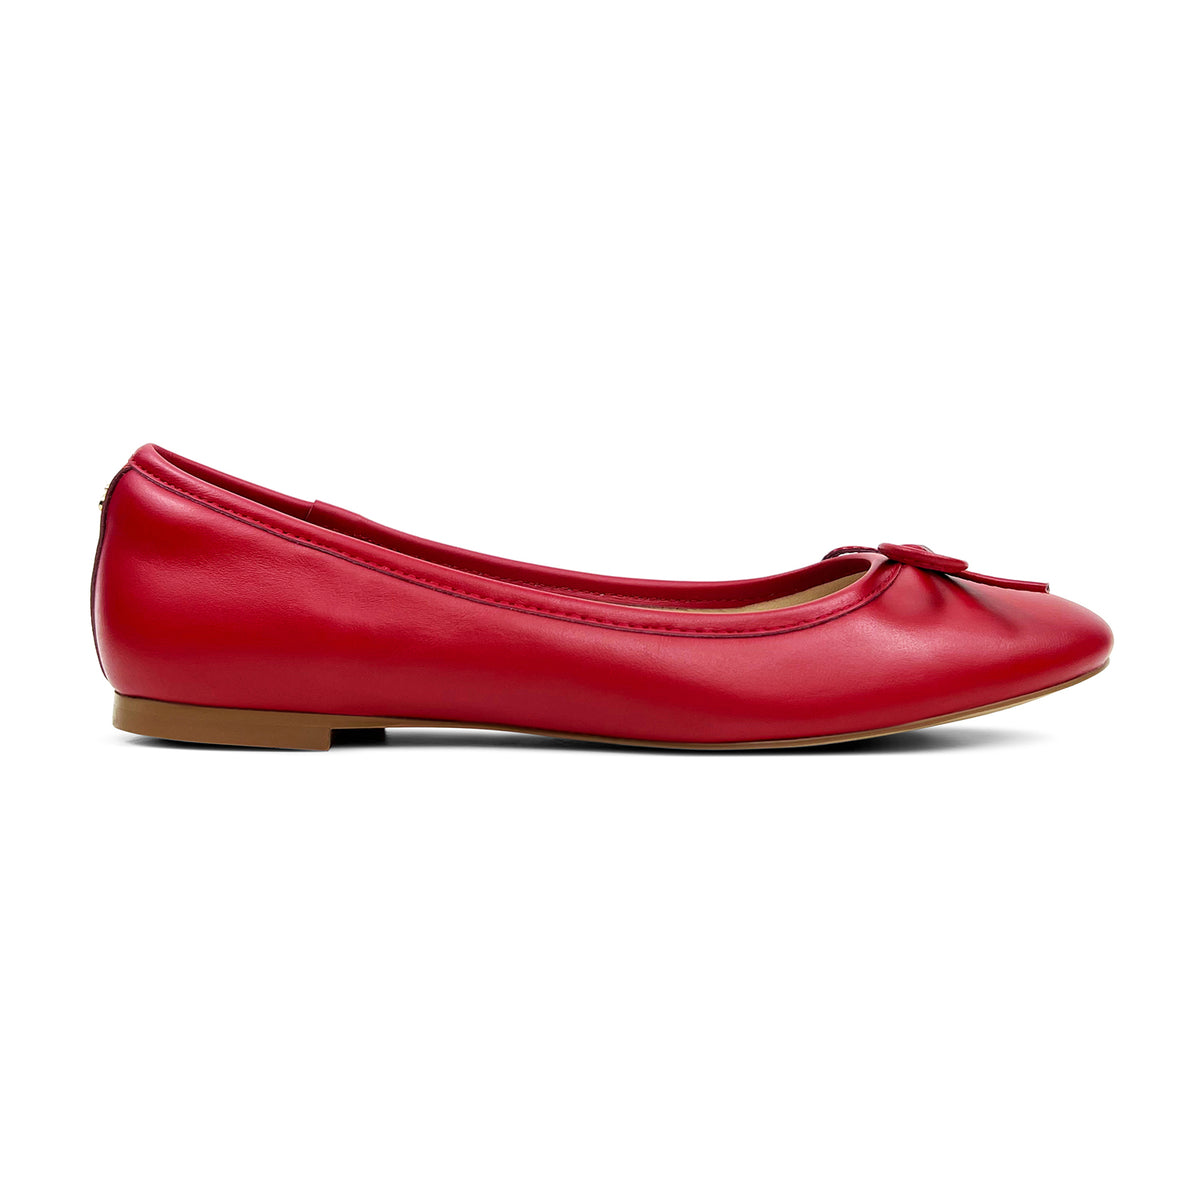 Sadie Ballet Flat in Red Nappa Leather